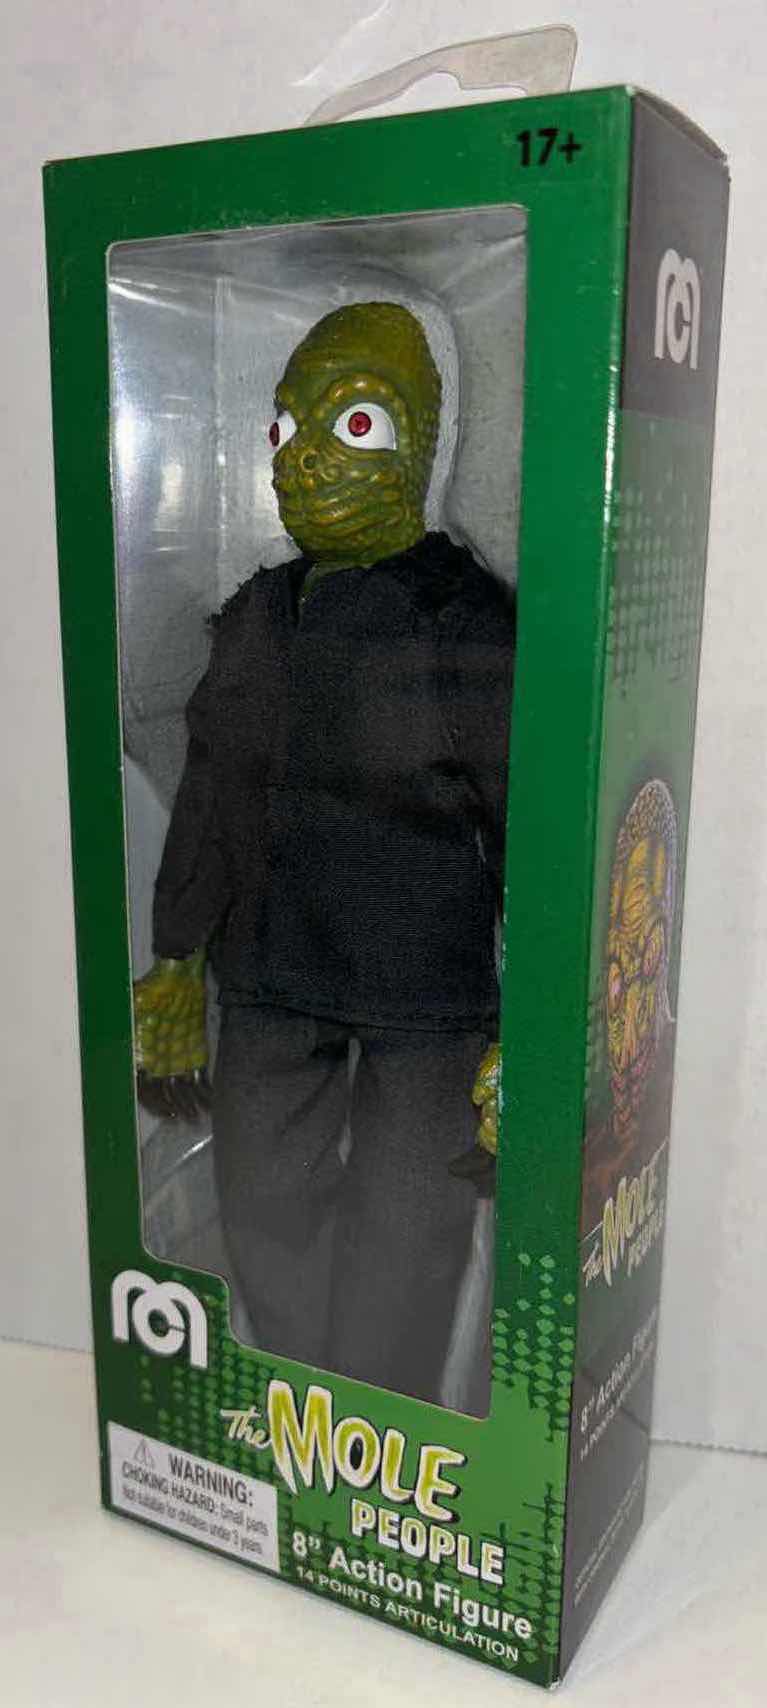 Photo 2 of BRAND NEW MEGO 8” ACTION FIGURE, “THE MOLE PEOPLE”